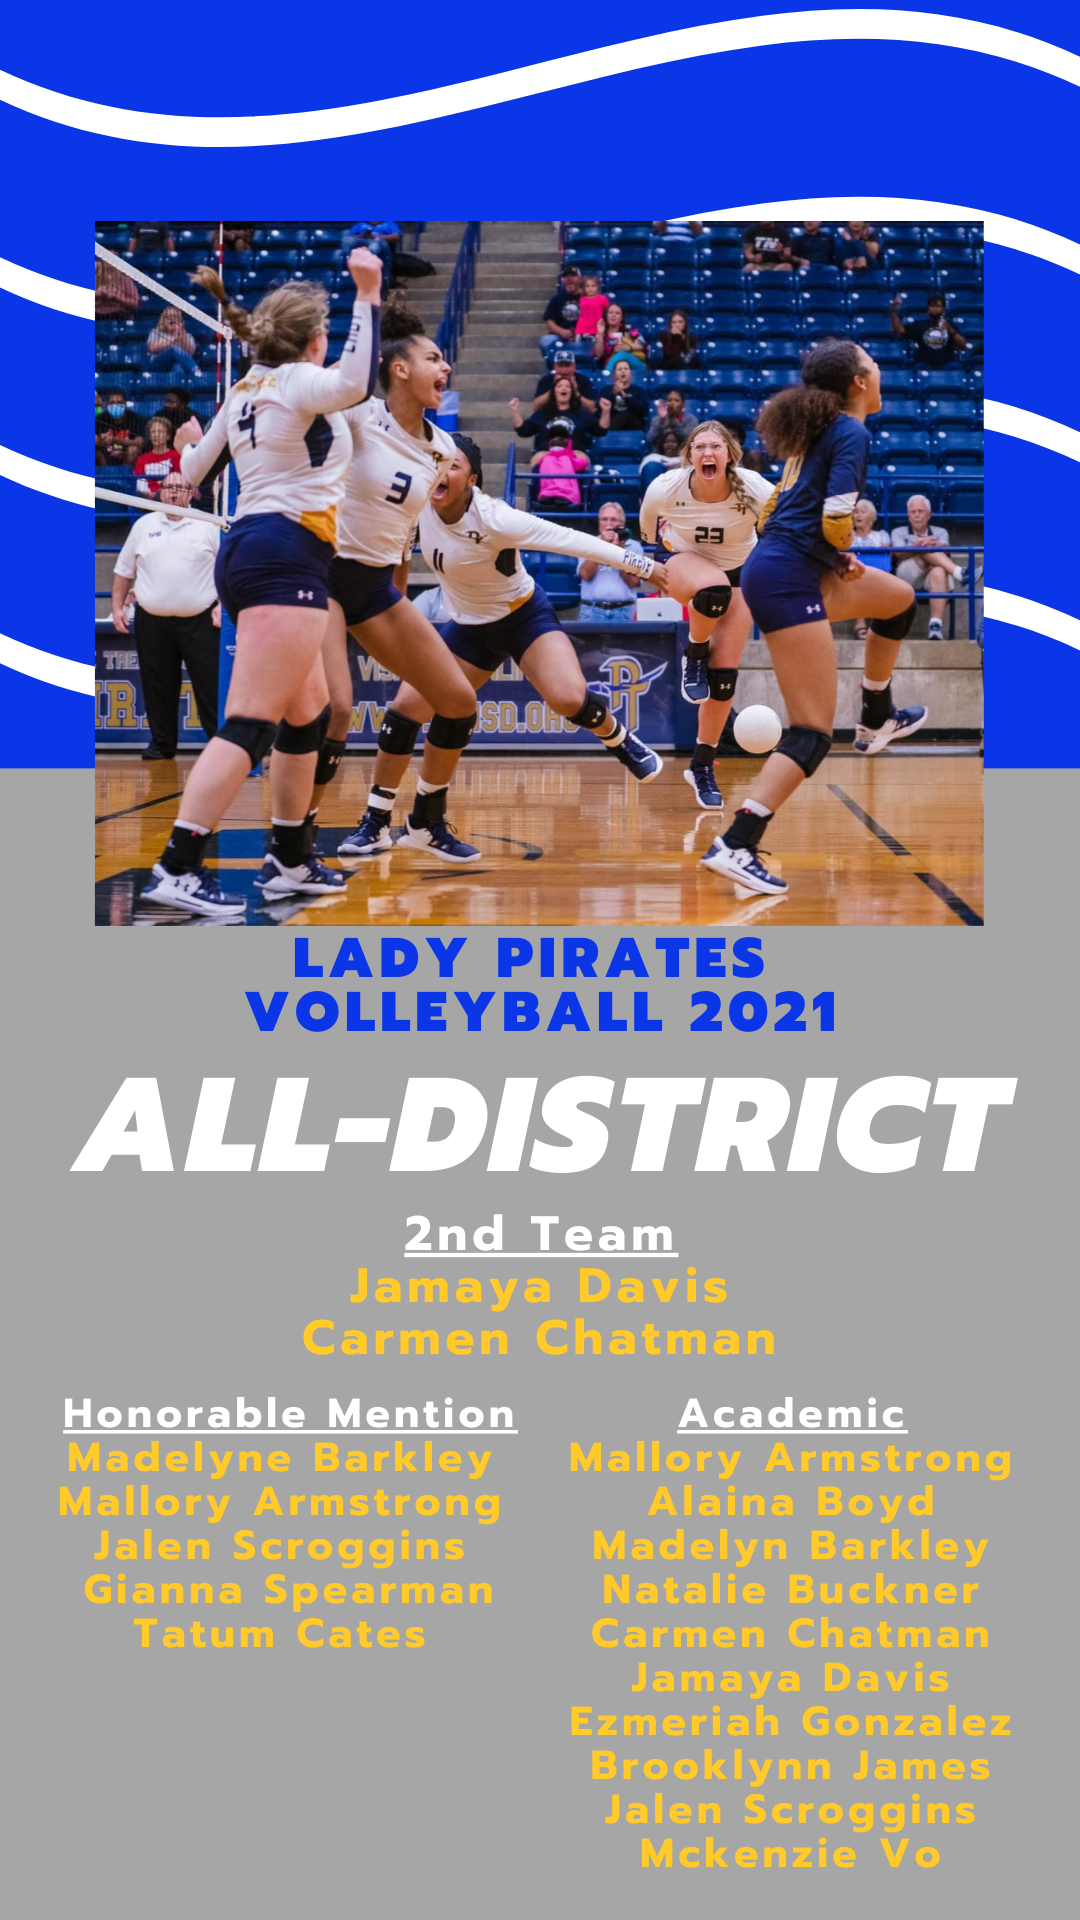 All district awards